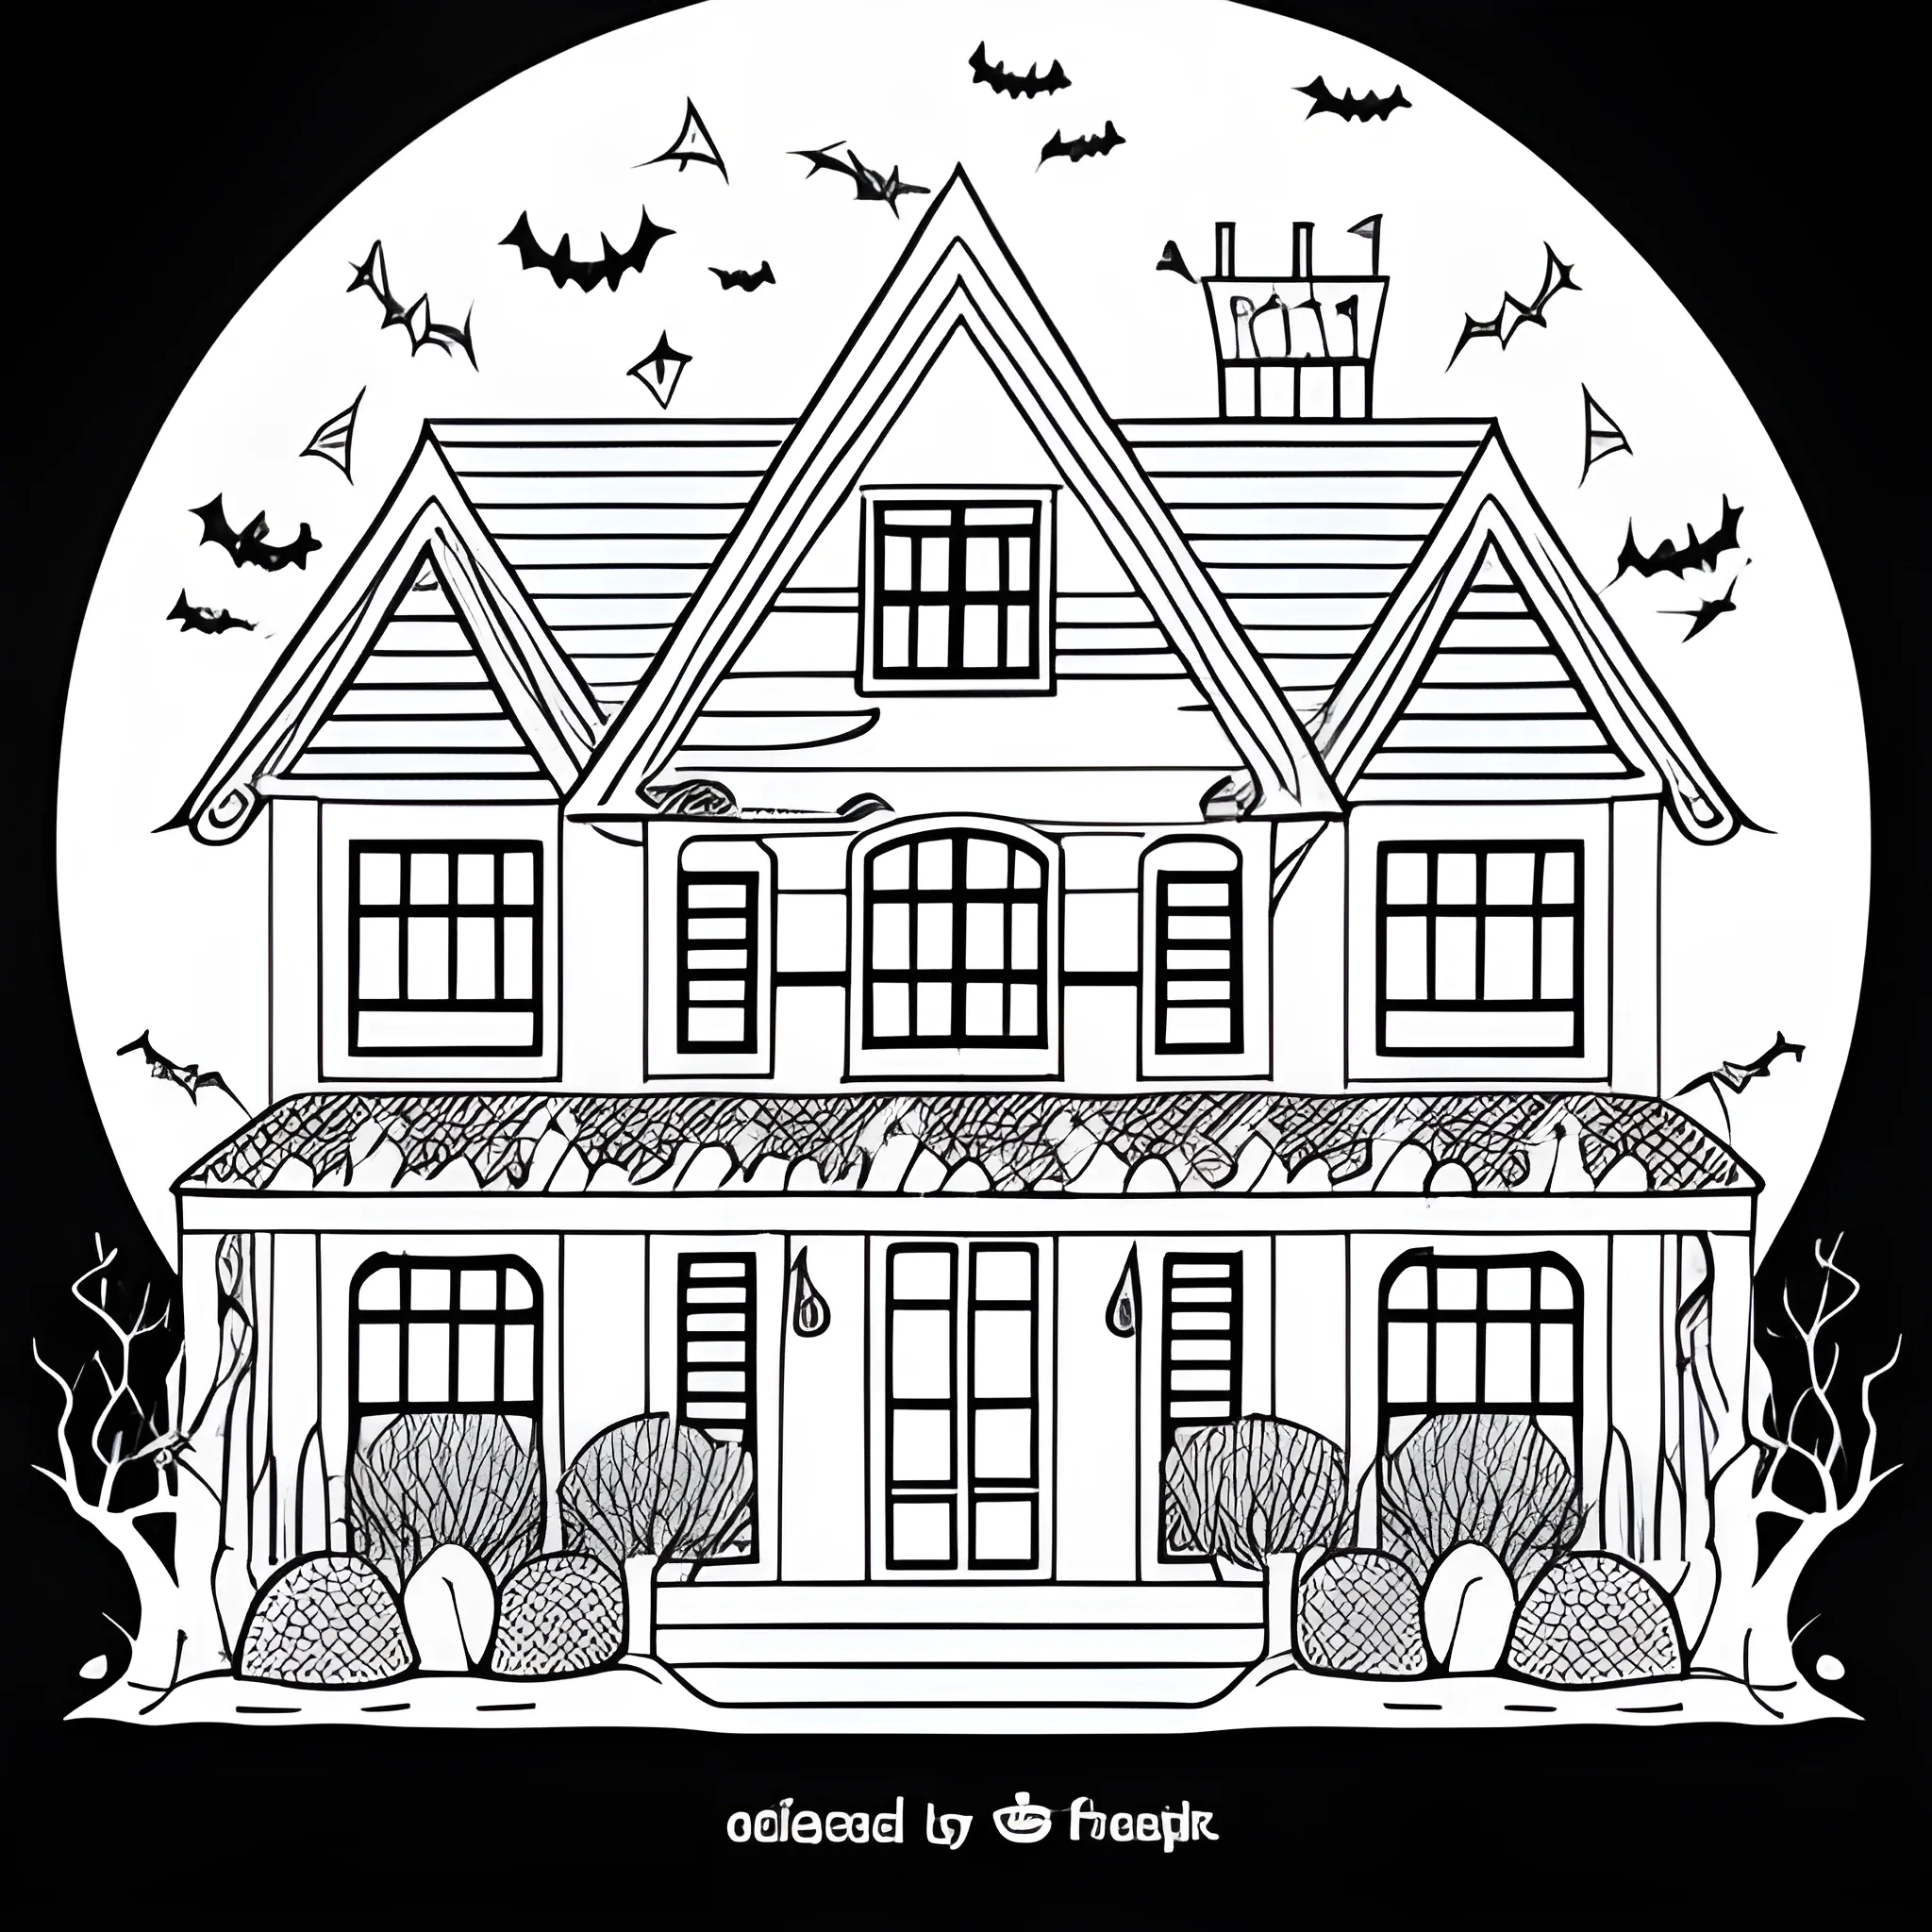 coloring book white, house in halloween, only lines, white background page, no color planes
